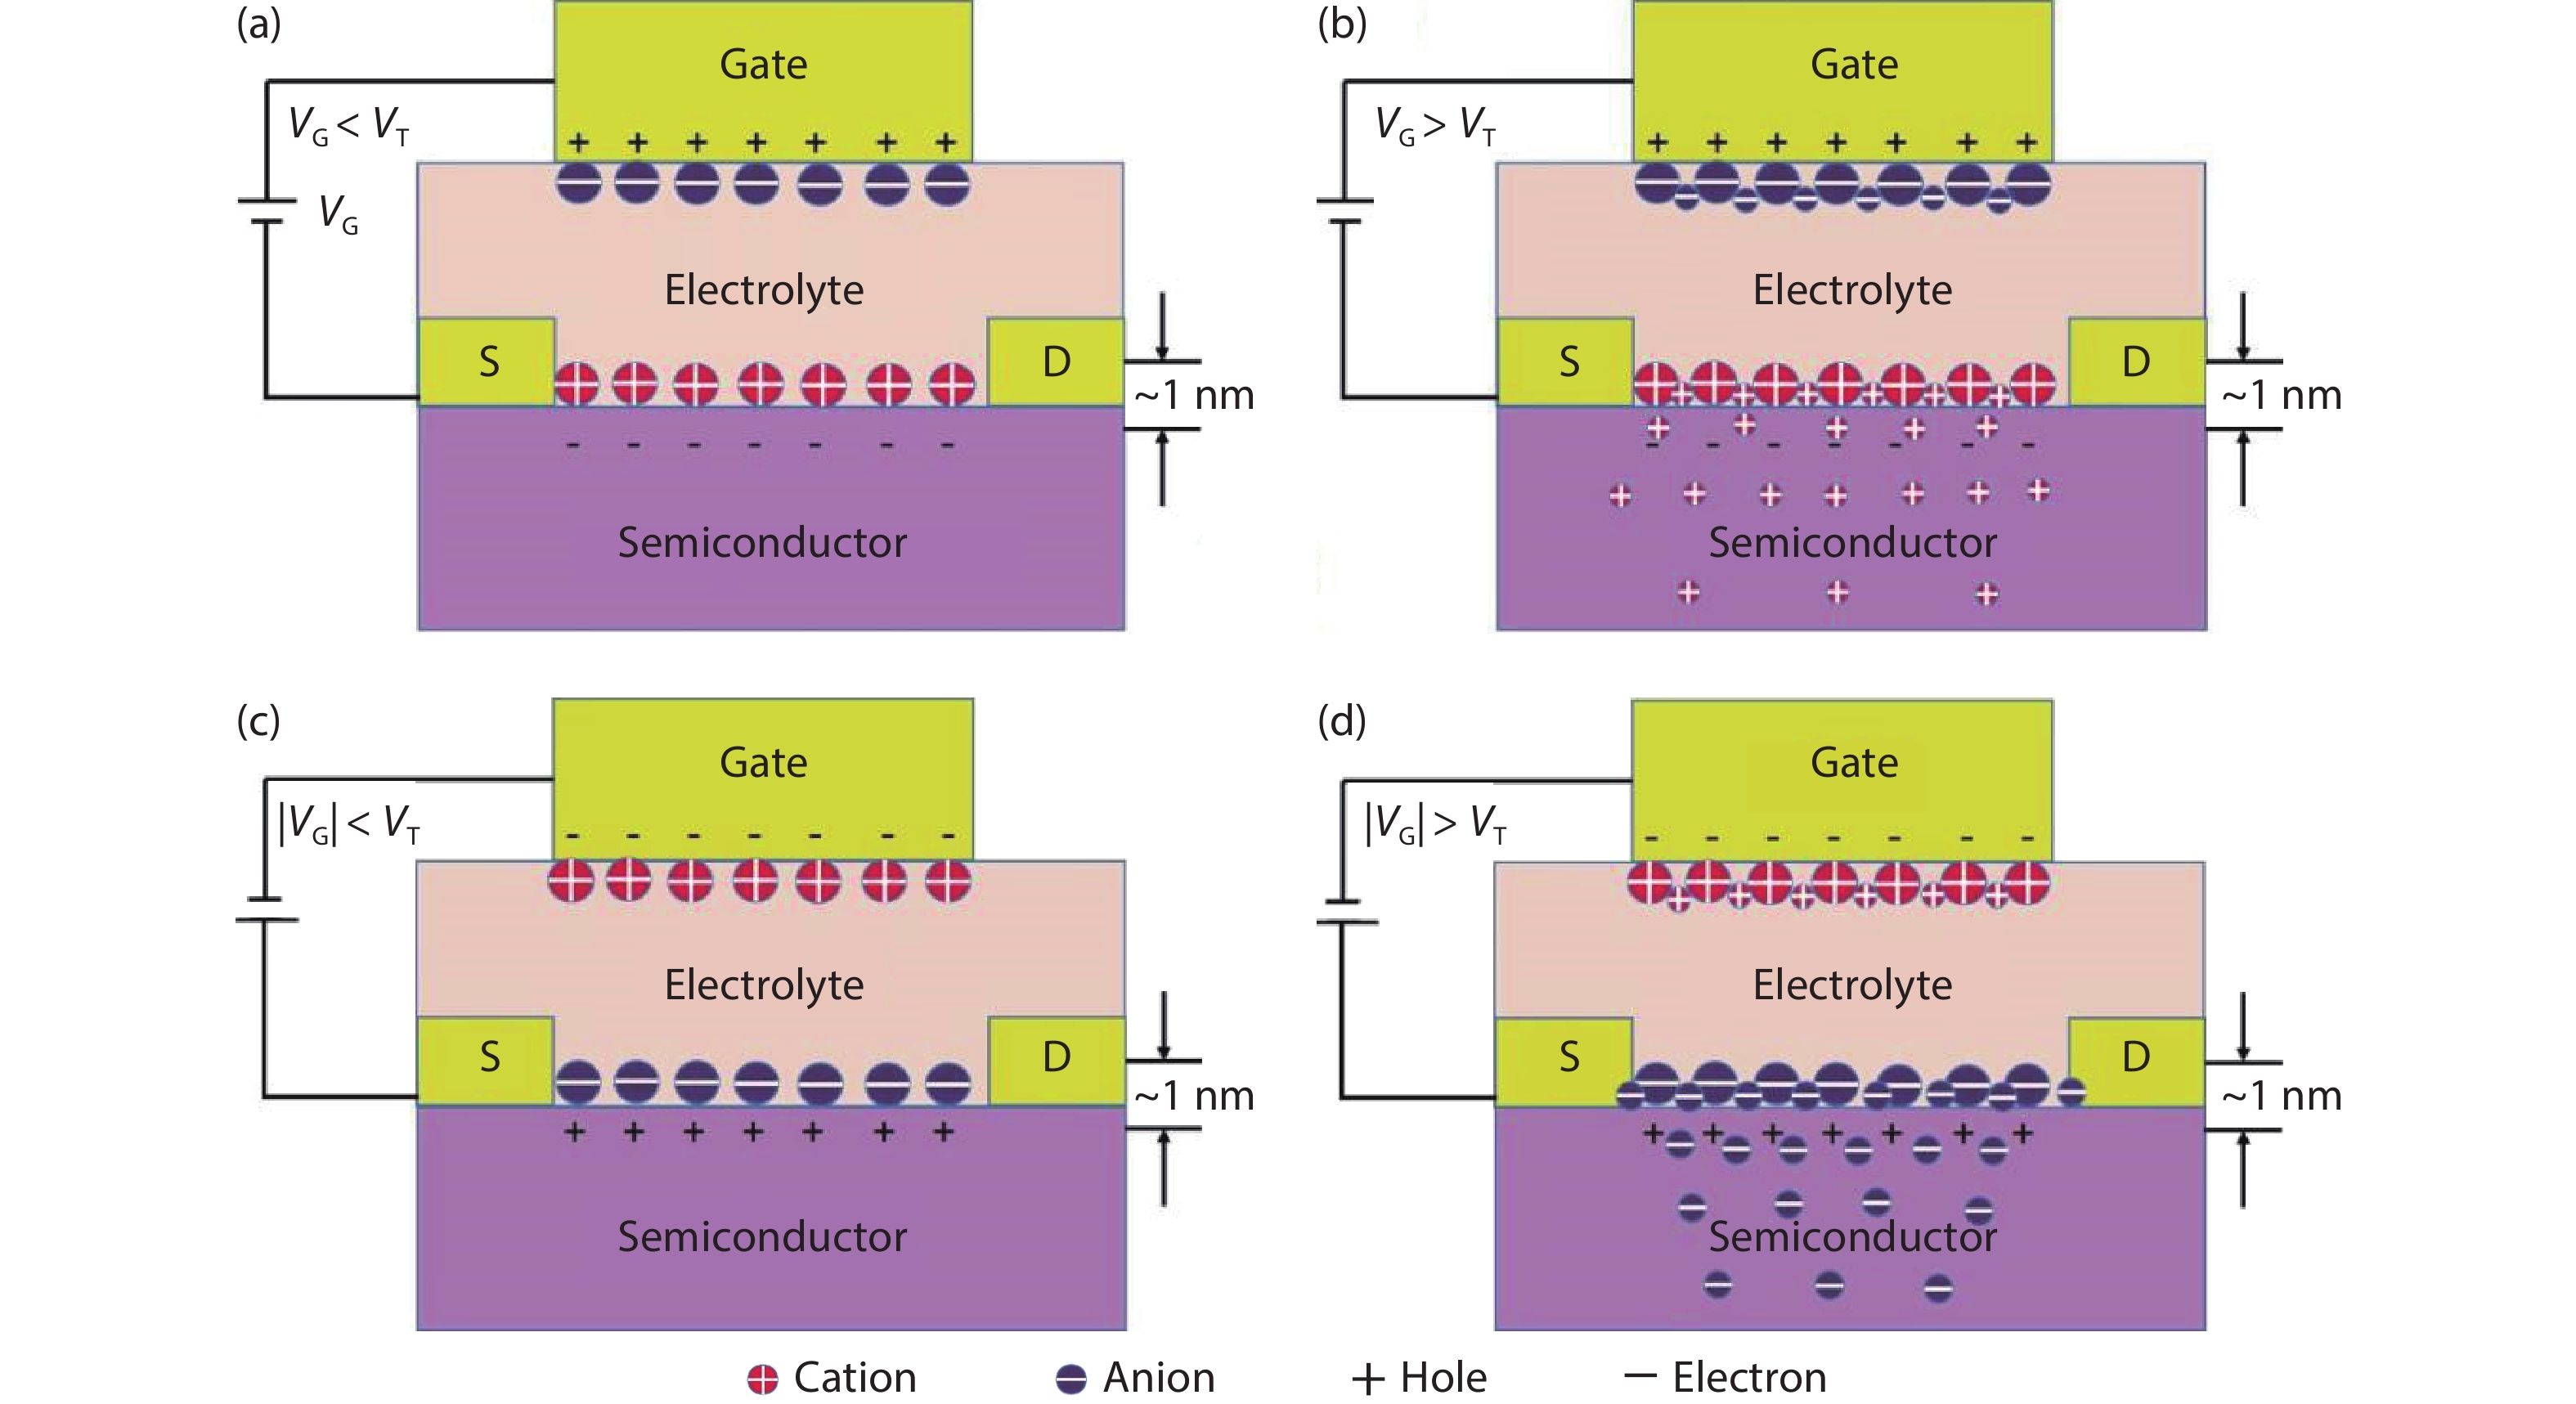 (Color online) Schematic of the electrolyte-gated transistor operation mechanisms. (a, c) Quasi-static FET operation and (b, d) electrochemical transistors operation. (a) When a positive VG VT is applied, an EDL is formed at the electrolyte/semiconductor interface (electron doping). (b) When a positive VG > VT is applied, an EDL is formed at the electrolyte/semiconductor interface, but some cations can intercalate into the semiconductor (electrochemical doping). (c) When a negative VG VT is applied, an EDL is formed at the electrolyte/semiconductor interface (hole doping). (d) When a negative VG > VT is applied, an EDL is formed at the electrolyte/semiconductor interface but some anions can intercalate into the semiconductor (electrochemical doping).